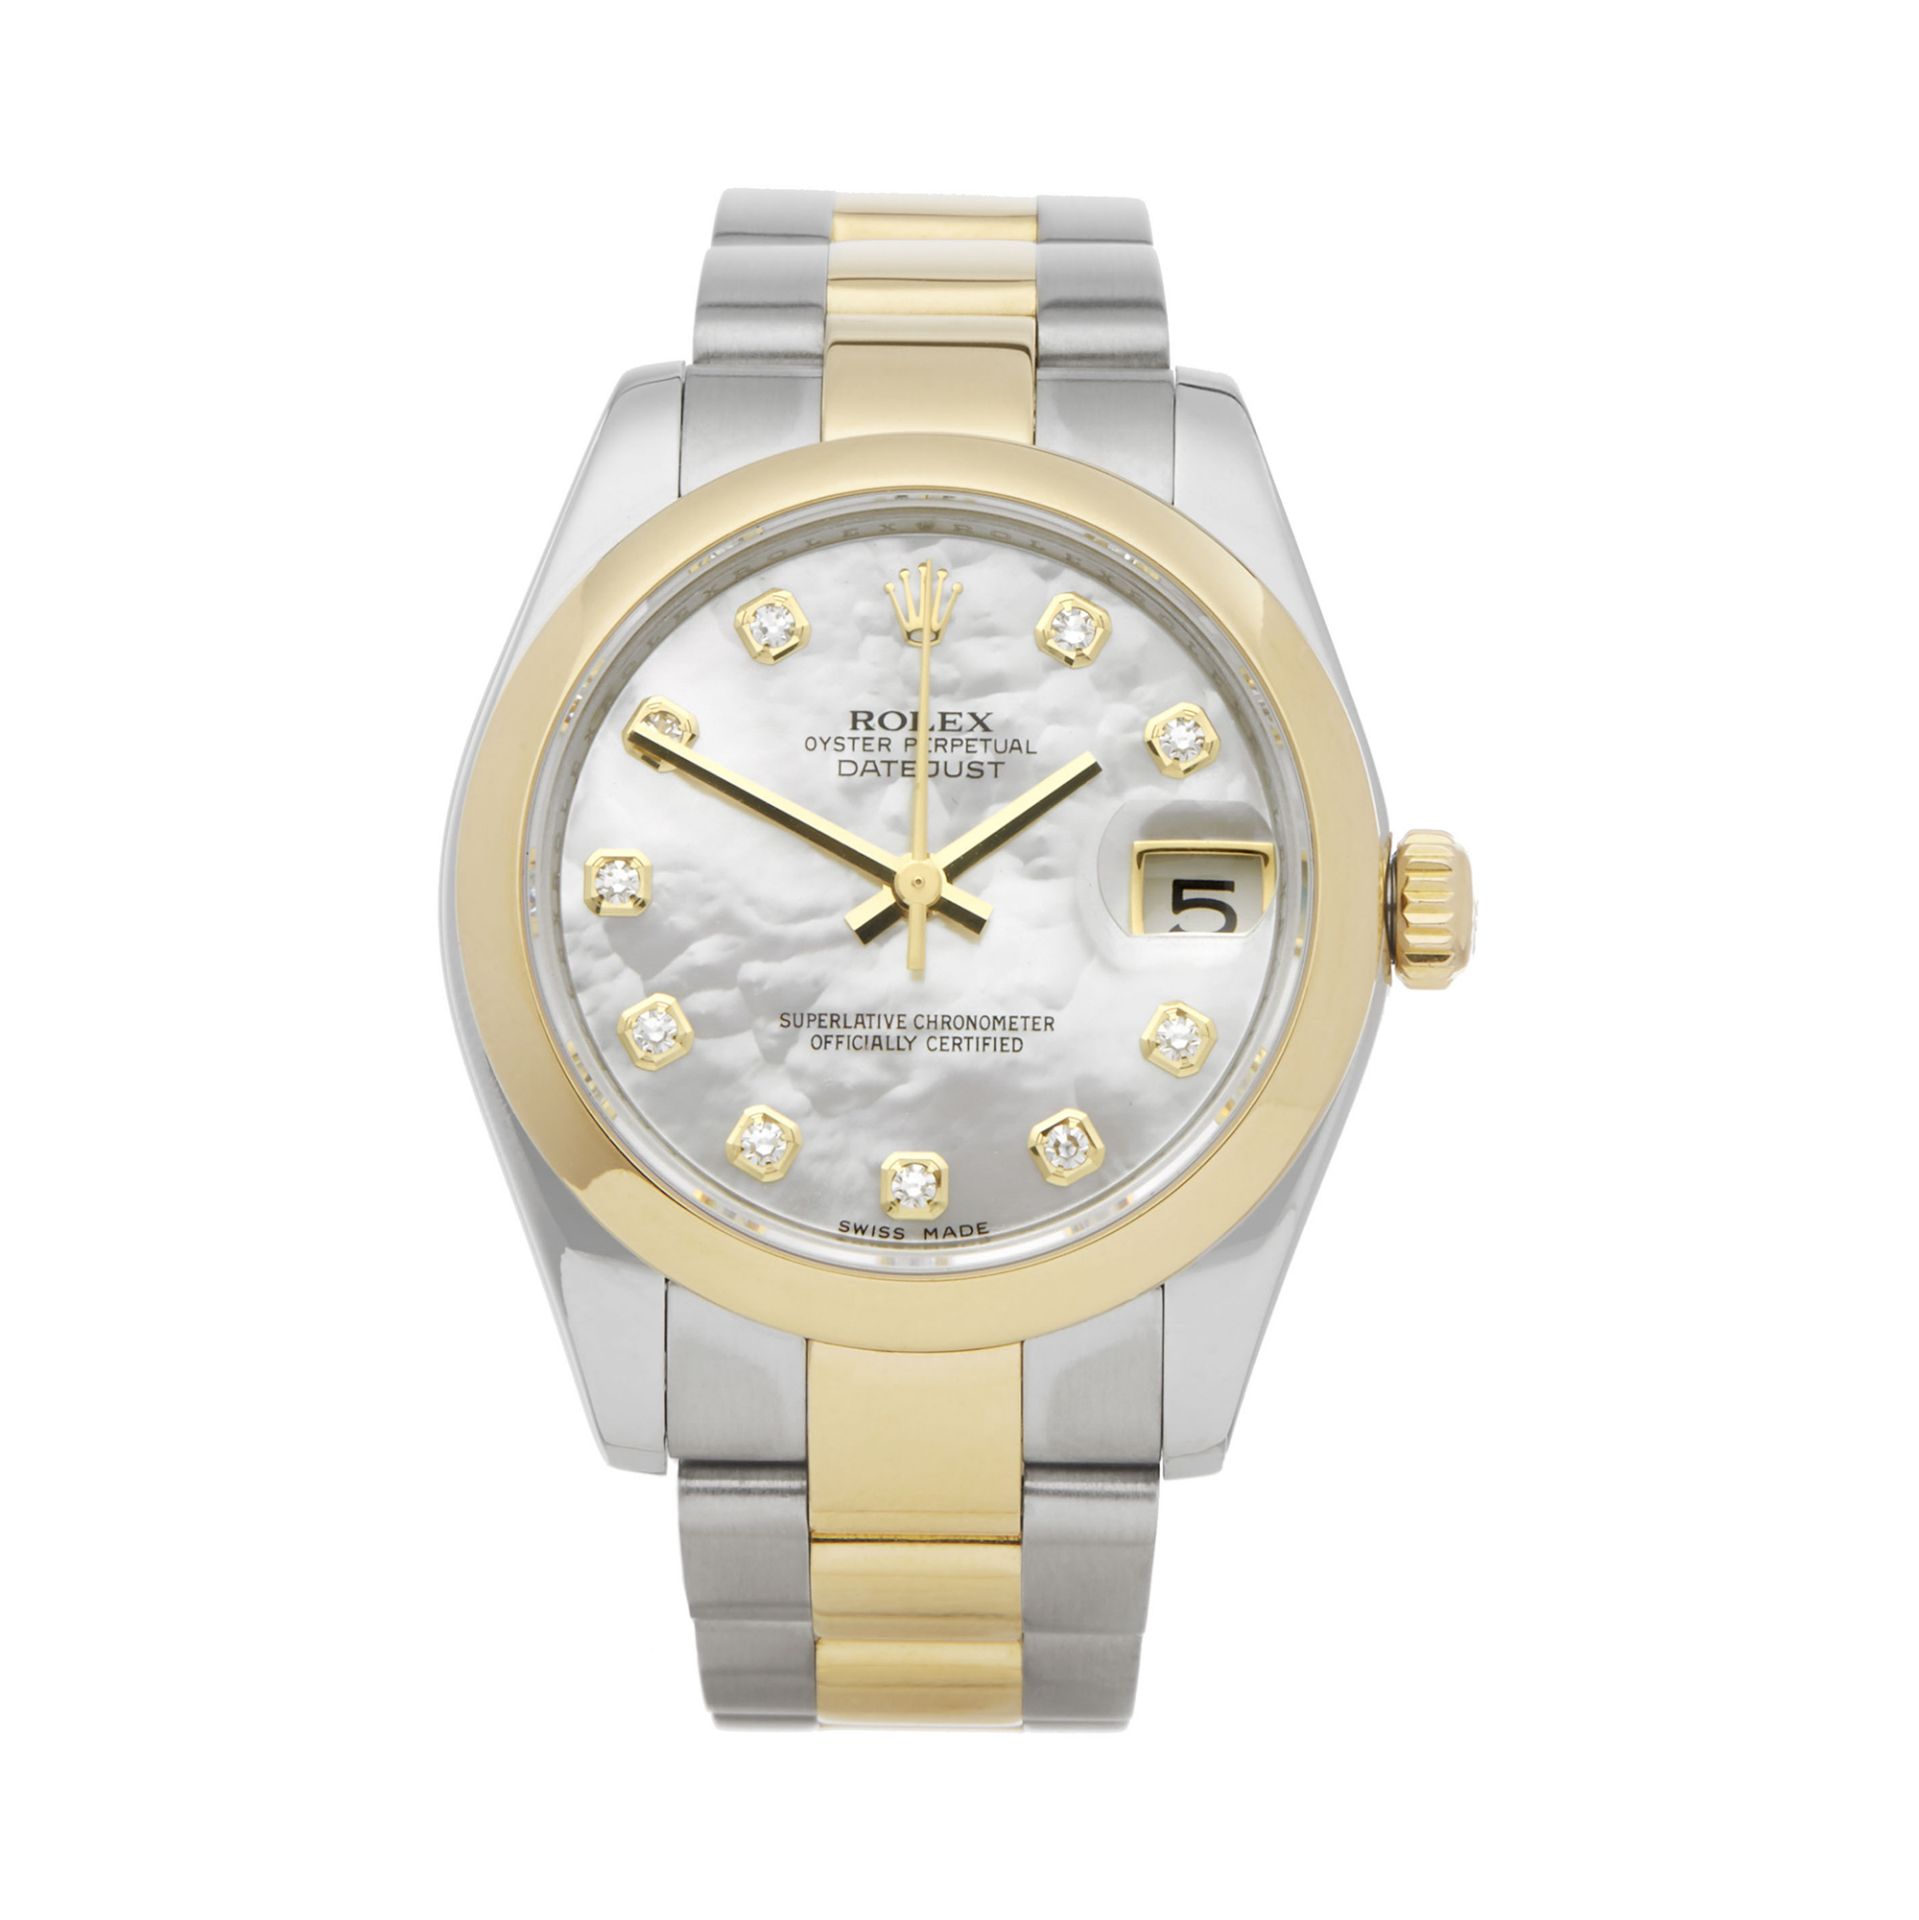 2007 Datejust 31 Mother of Pearl Diamond Stainless Steel & Yellow Gold - 178243 - Image 6 of 6